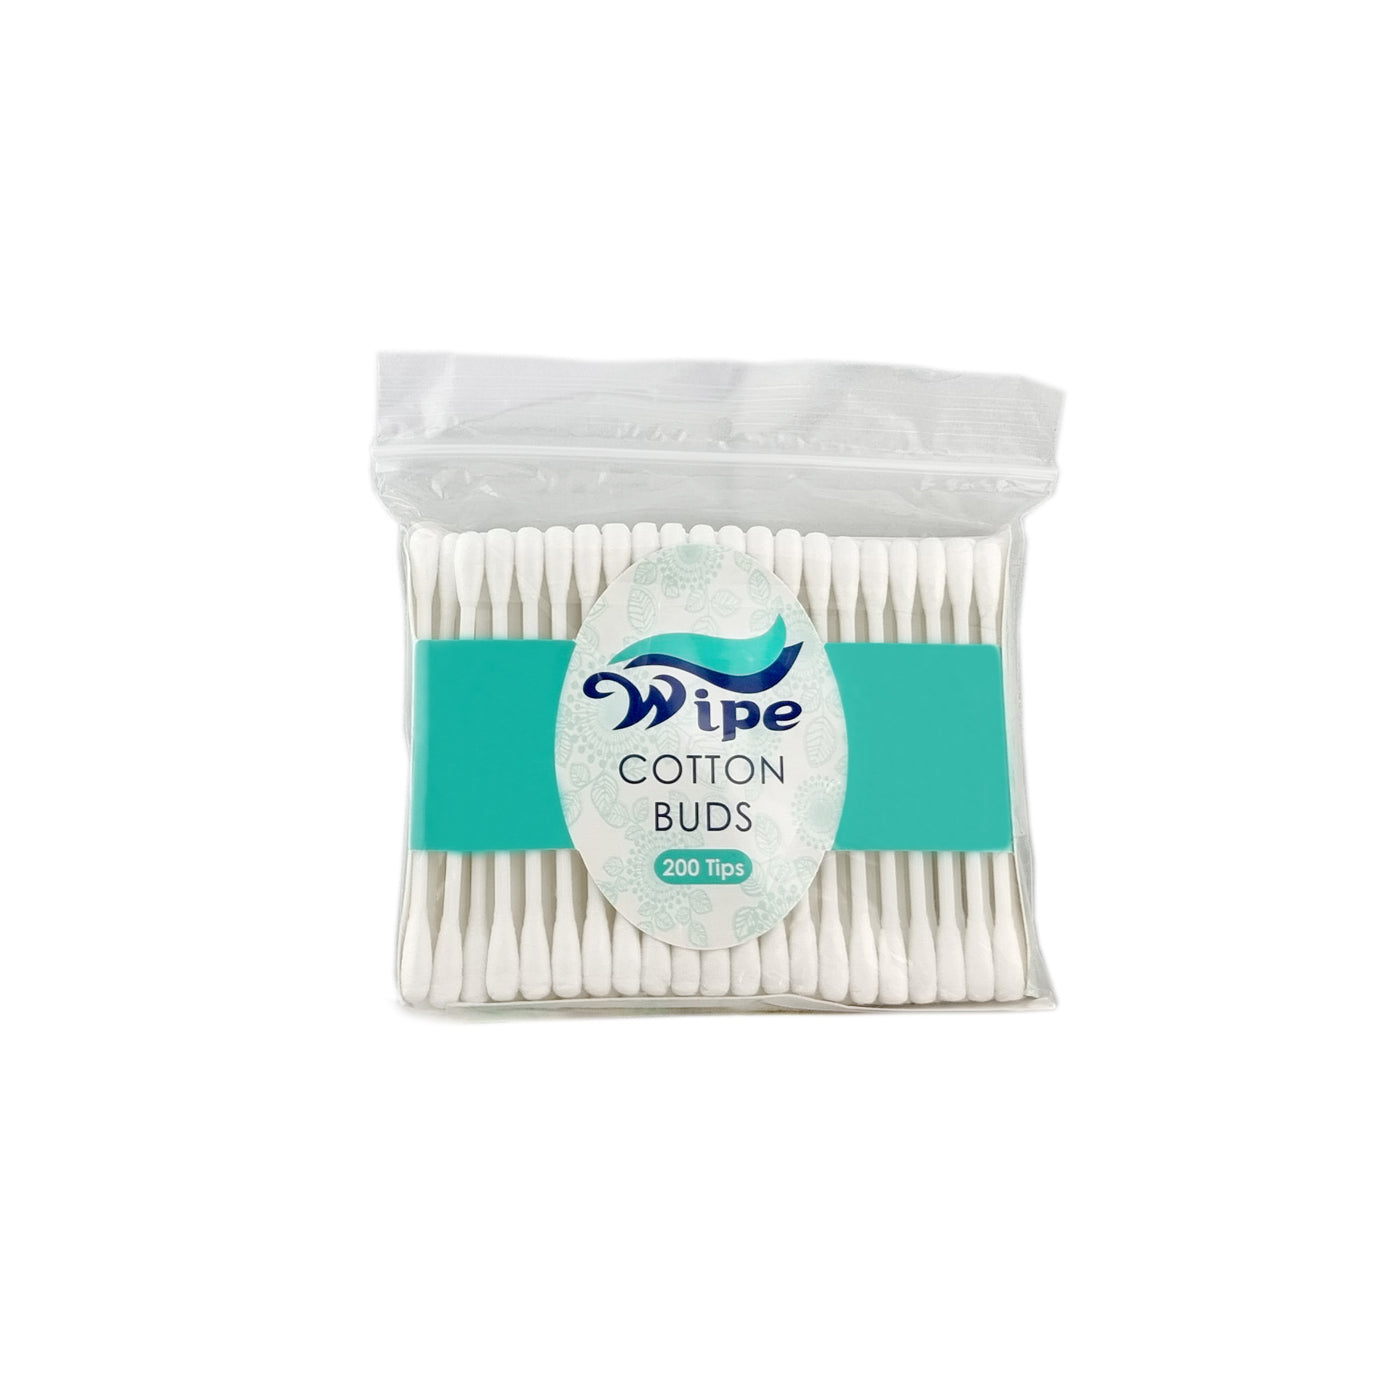 Wipe Cotton Buds Plastic Stem 200tips — PHILUSA Online Store